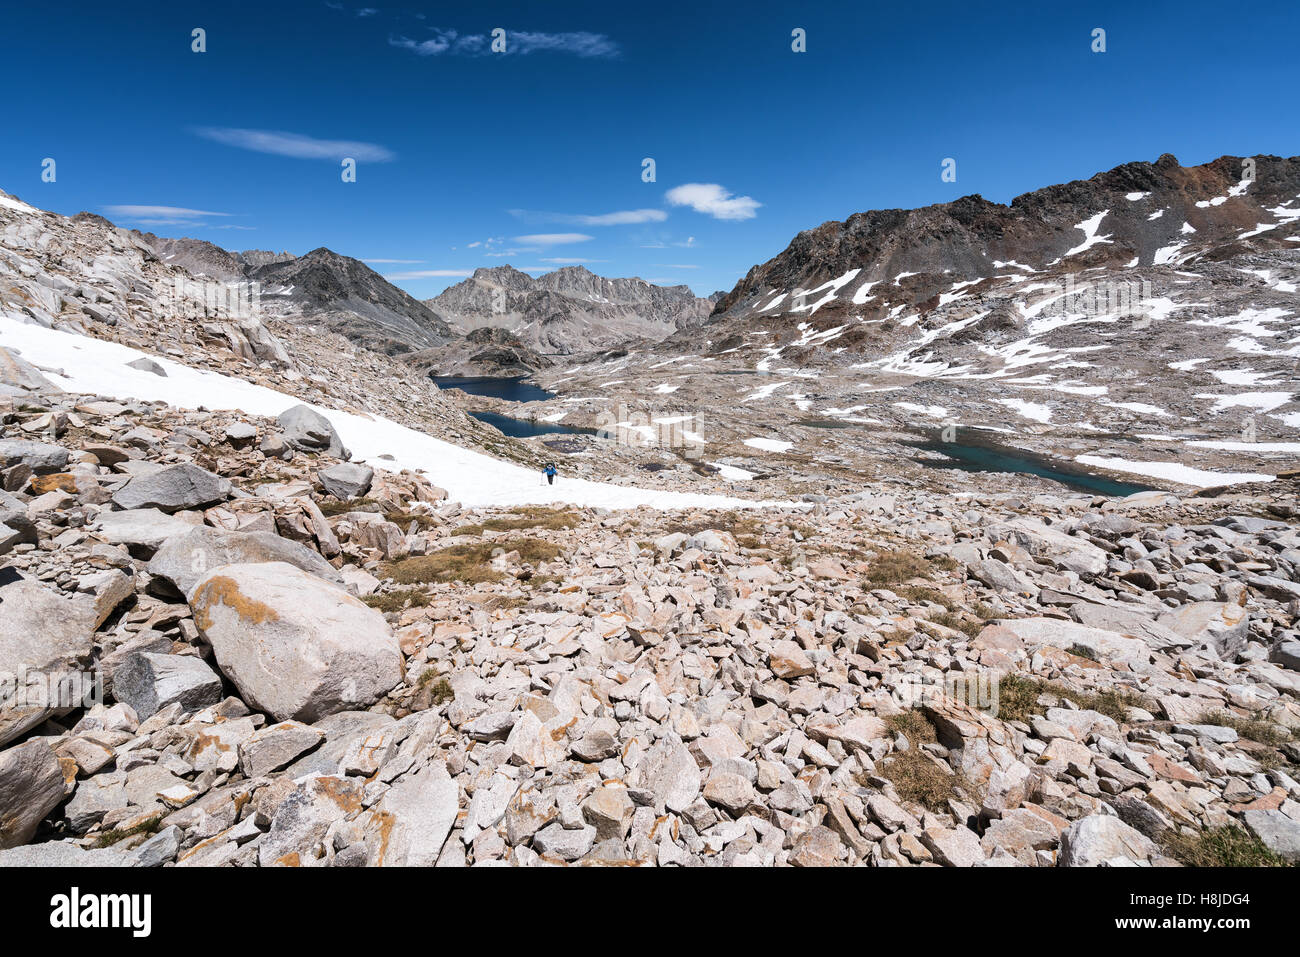 A view from Muir Pass on John Muir Trail, Kings Canyon National Park, California, United States of America Stock Photo